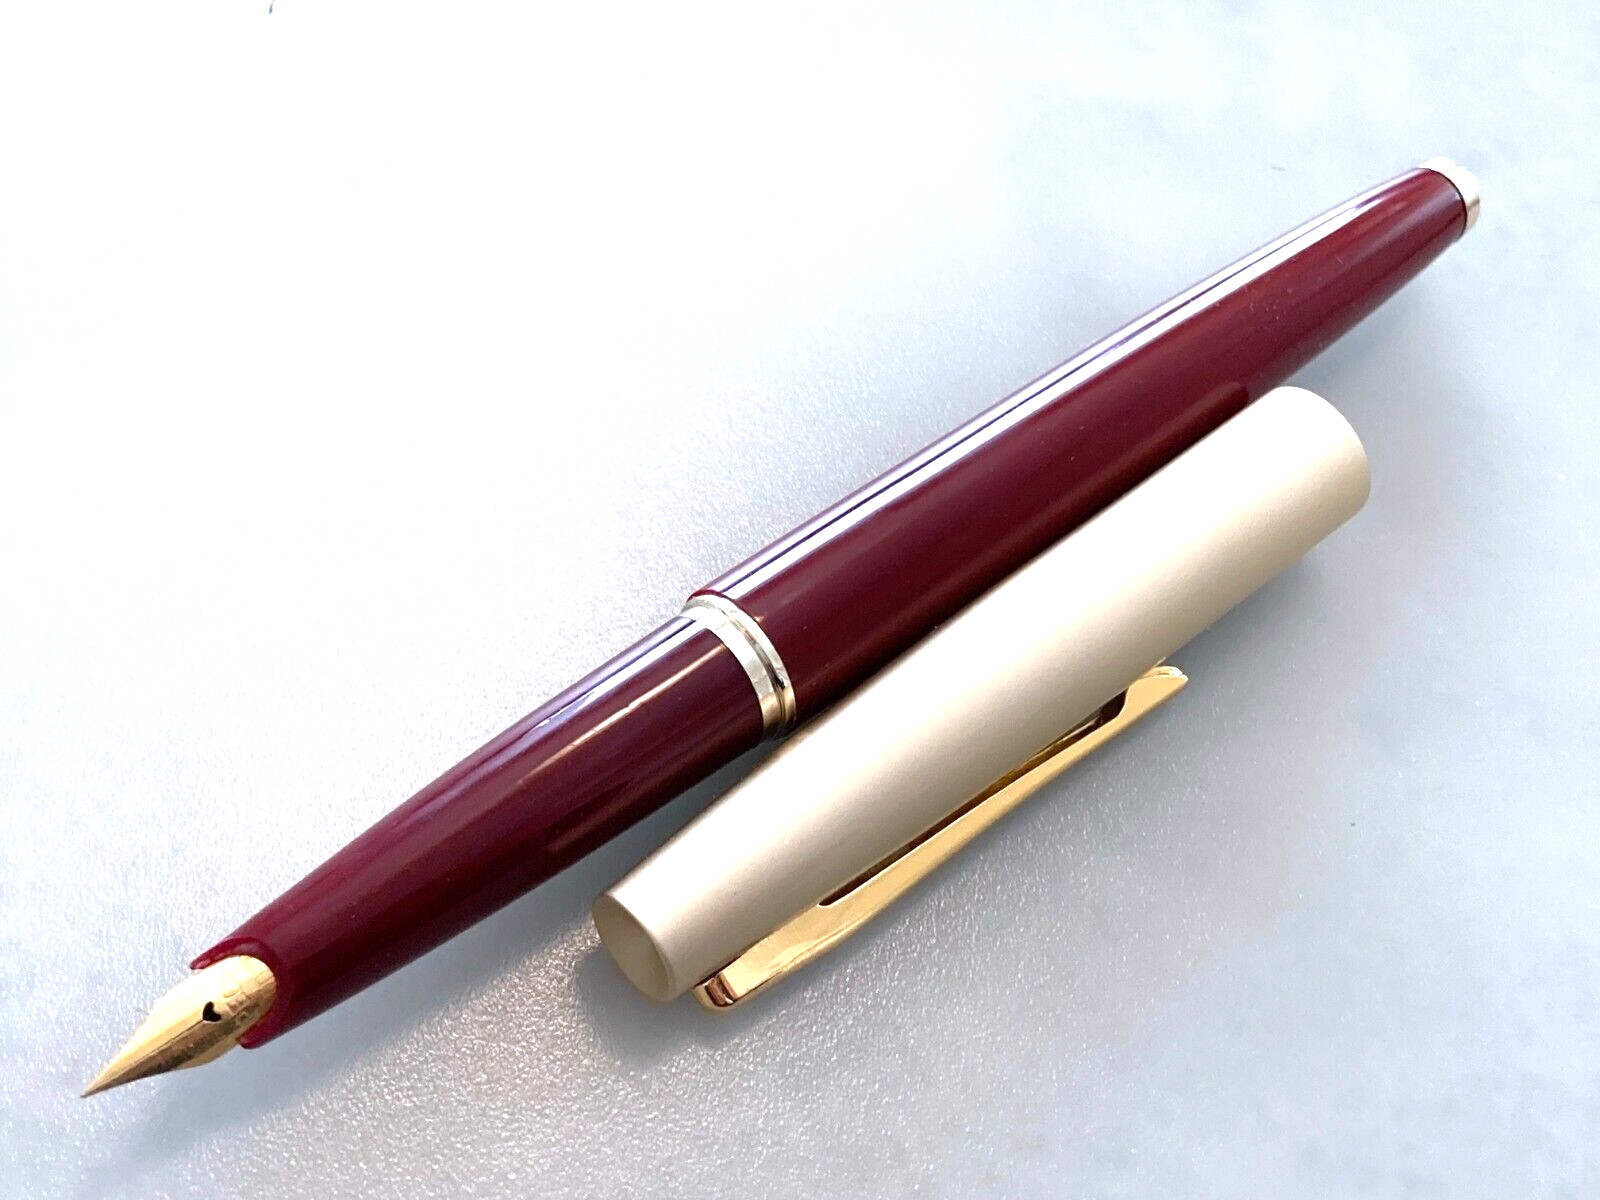 Japanese  vintage  fountain pen  from Japan